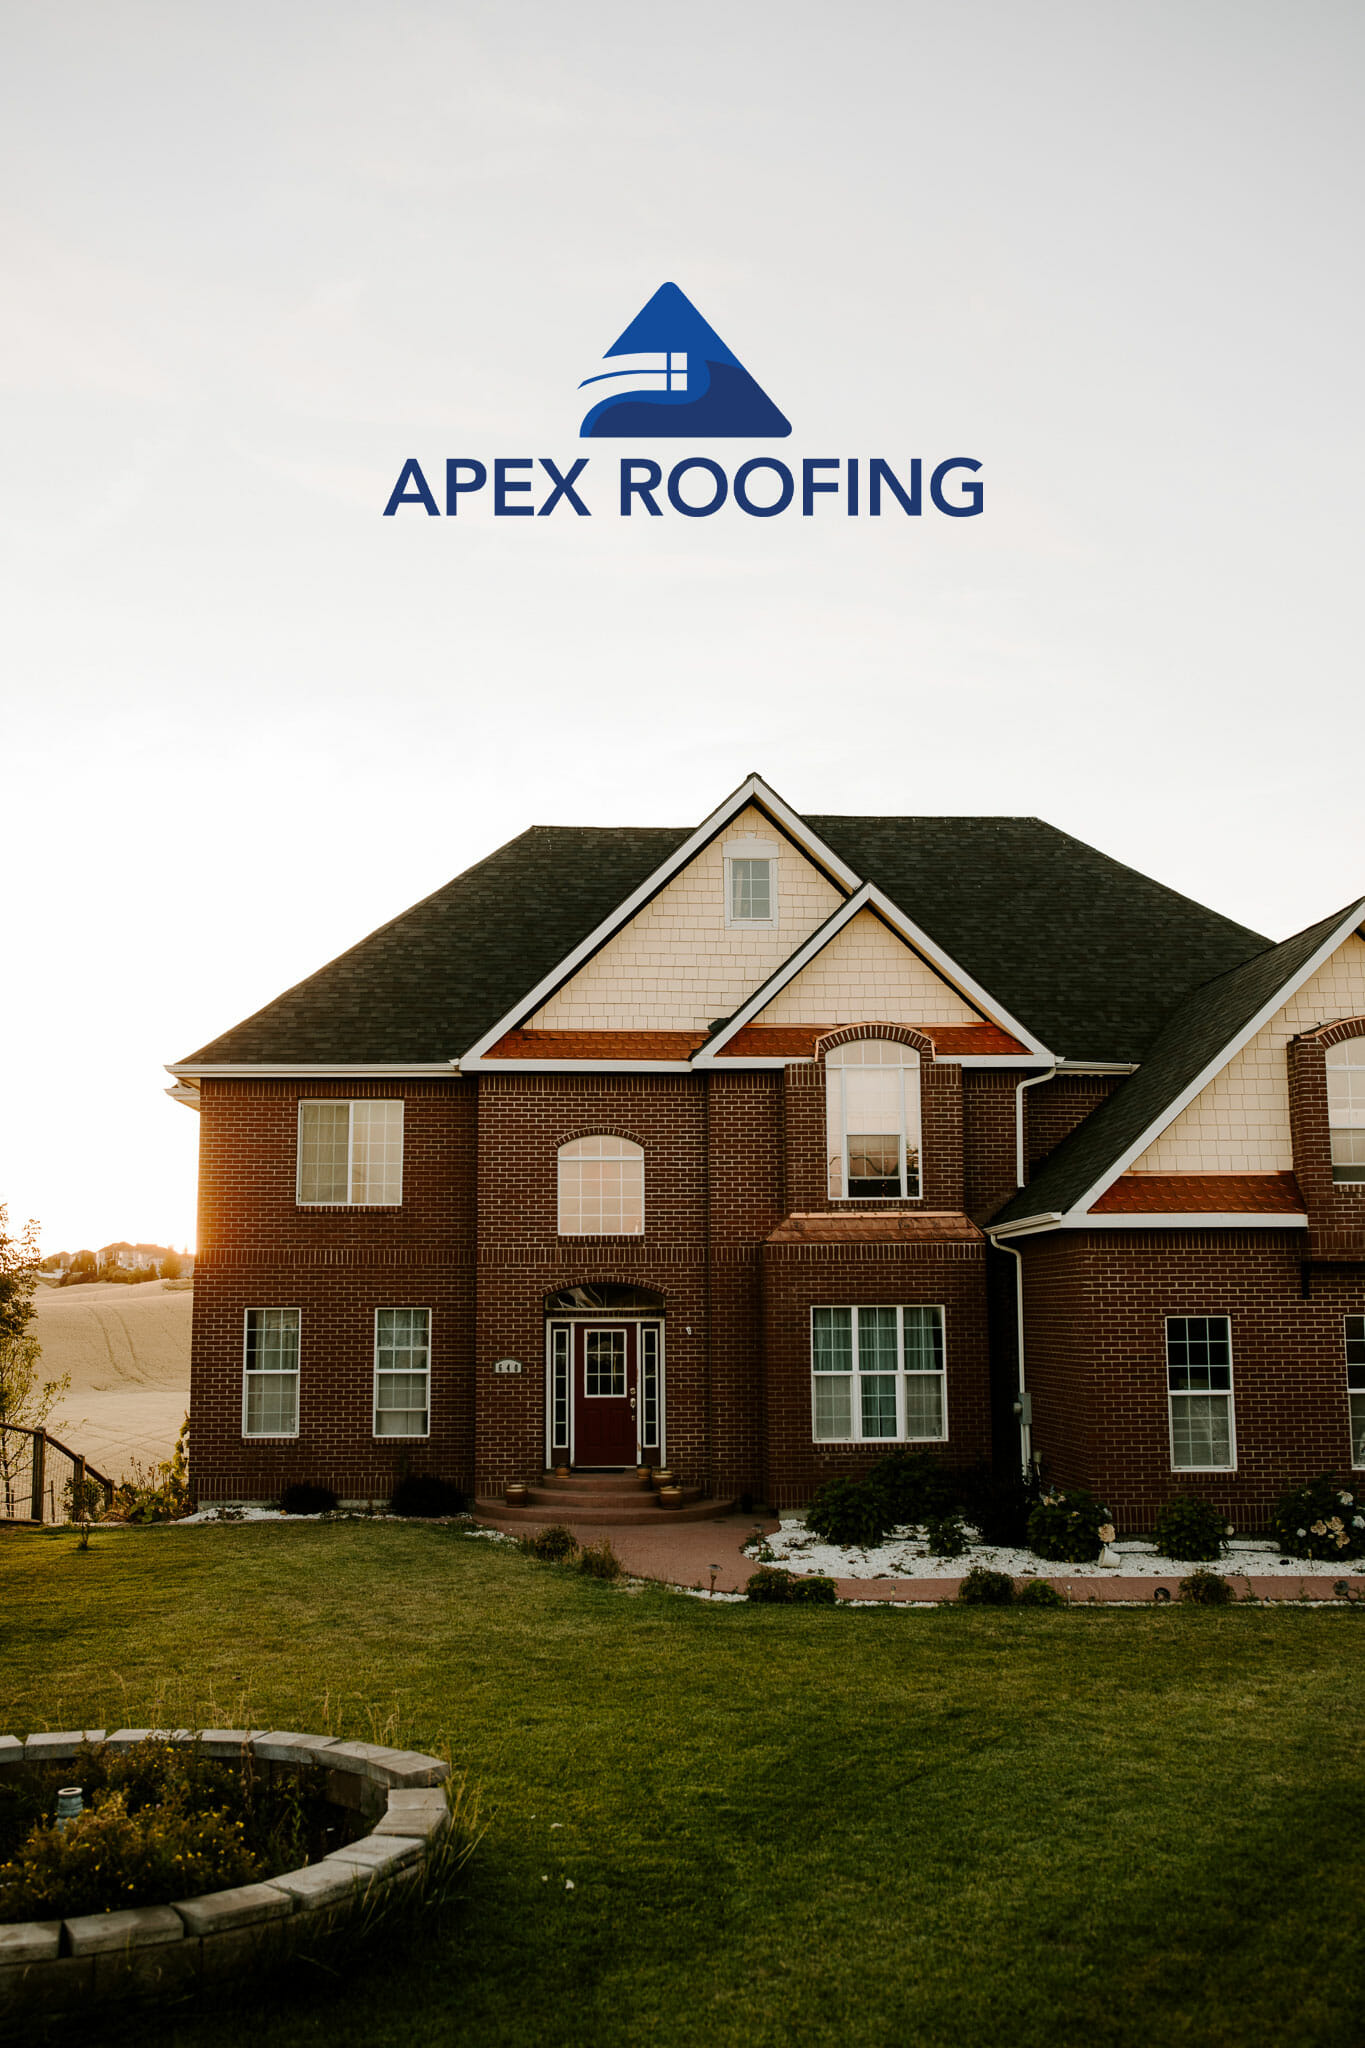 Apex Roofing - about company